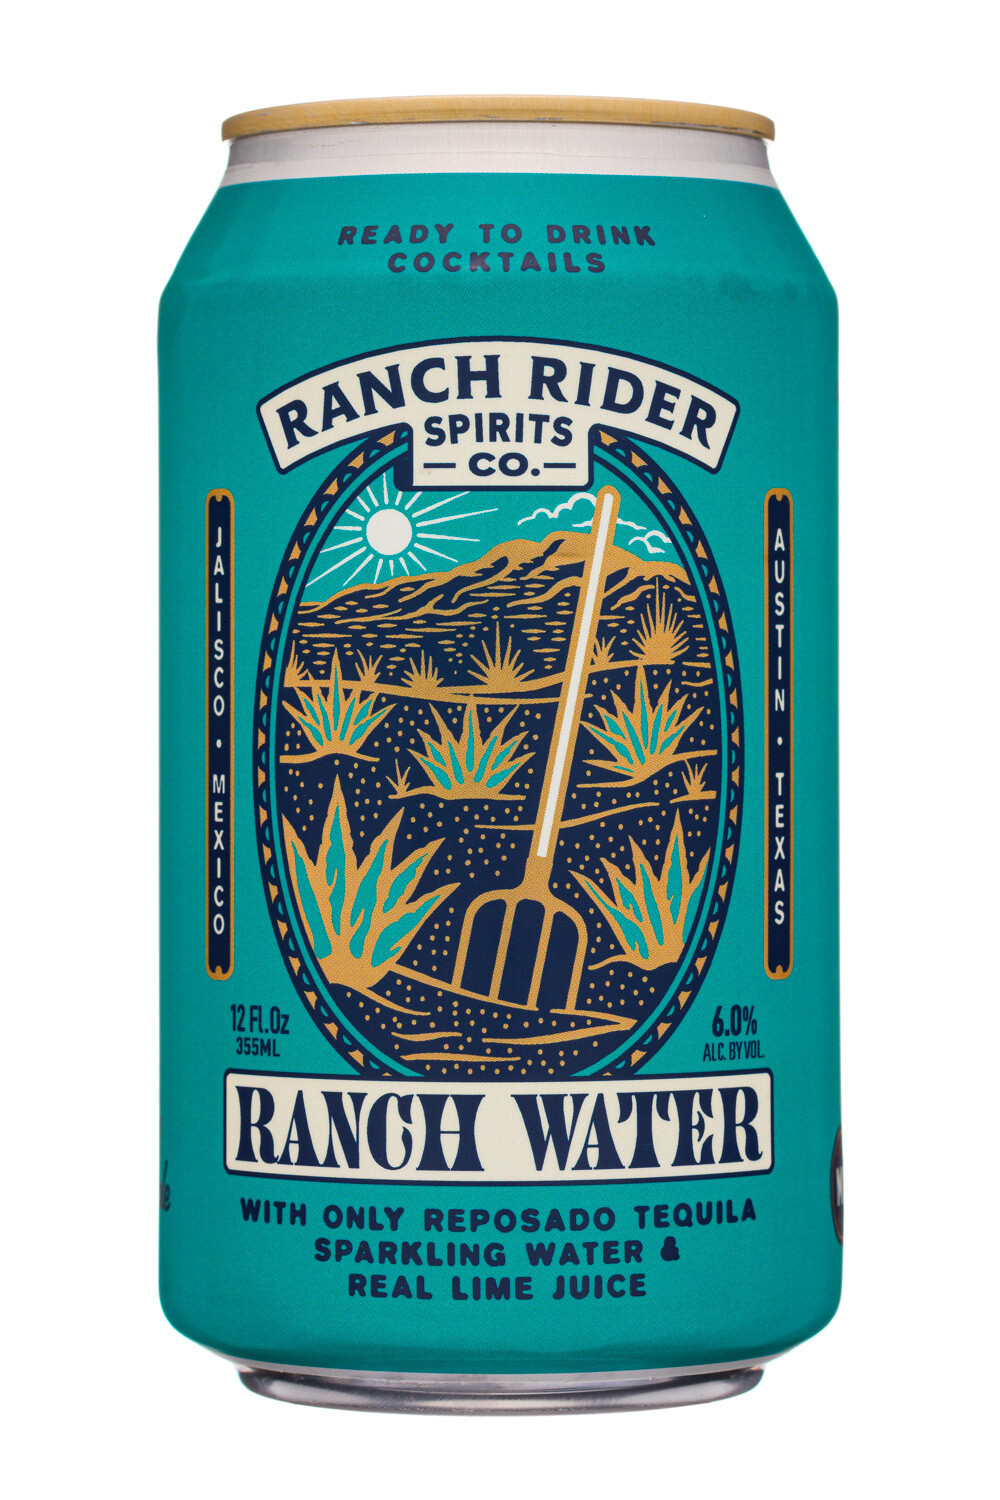 Ranch Rider Ranch Water 4-pack cans